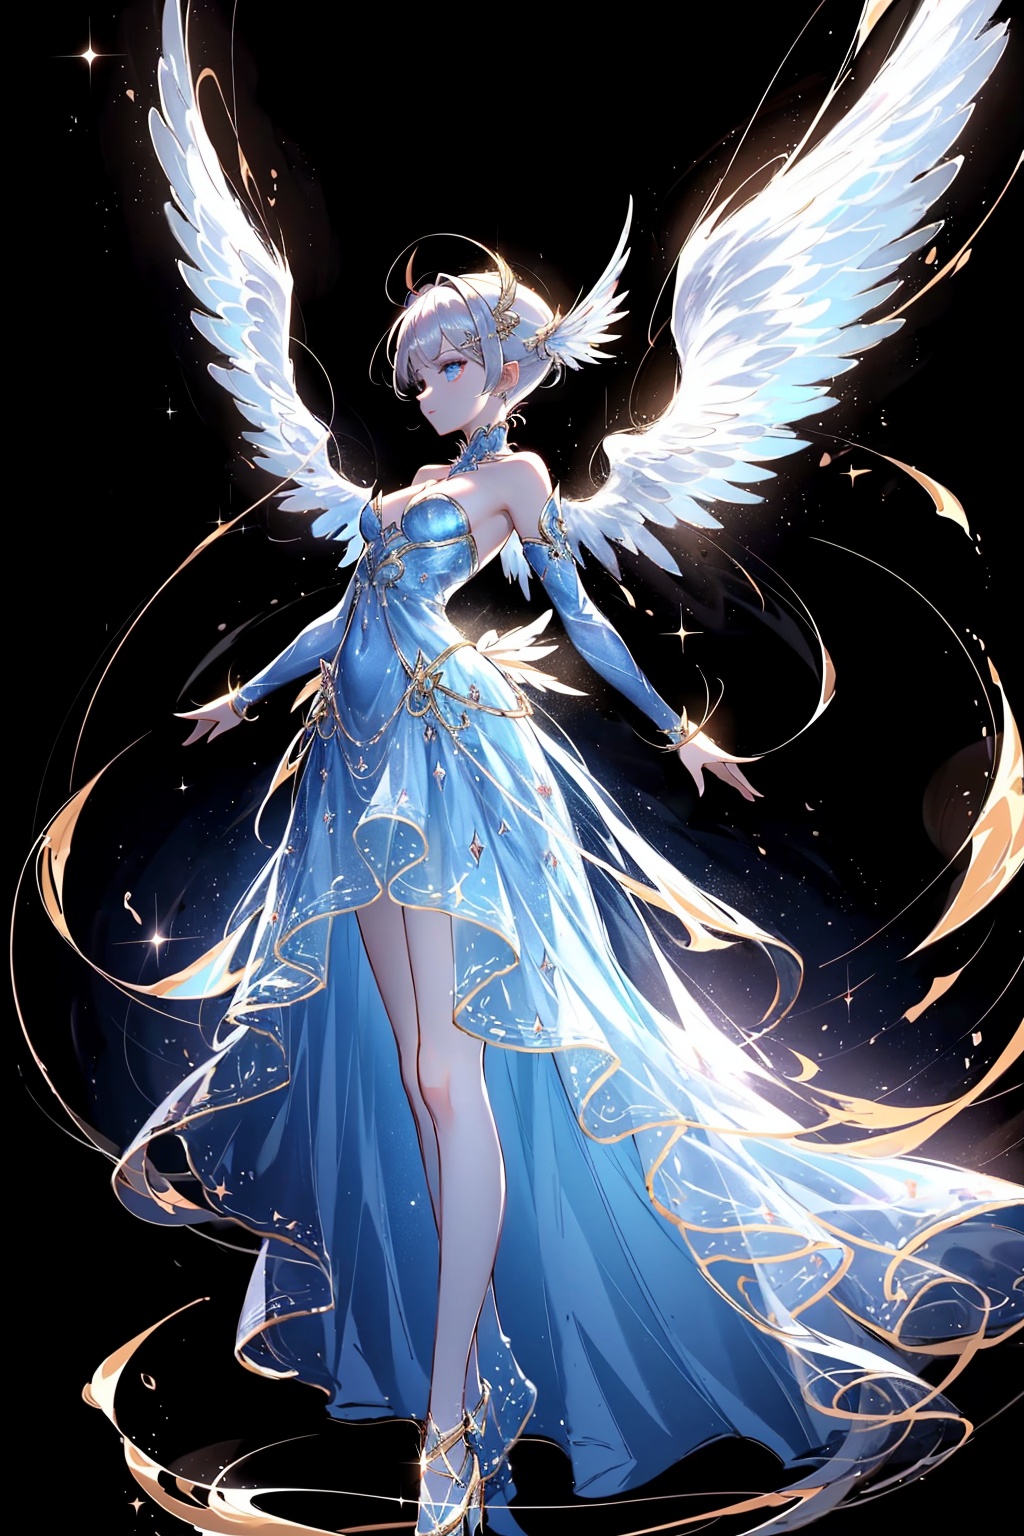  Best quality, 8k, cg, a close up of a person in a dress with wings, glowing angelic being, ethereal angelic being of light, astral fairy, ethereal wings, tron angel, ethereal essence, angel spirit guide, ethereal anime, white glowing aura, of beautiful angel, of an beautiful angel girl, beautiful angel, angelical, ethereal!!!, wings made of light, beautiful gothic xray angel